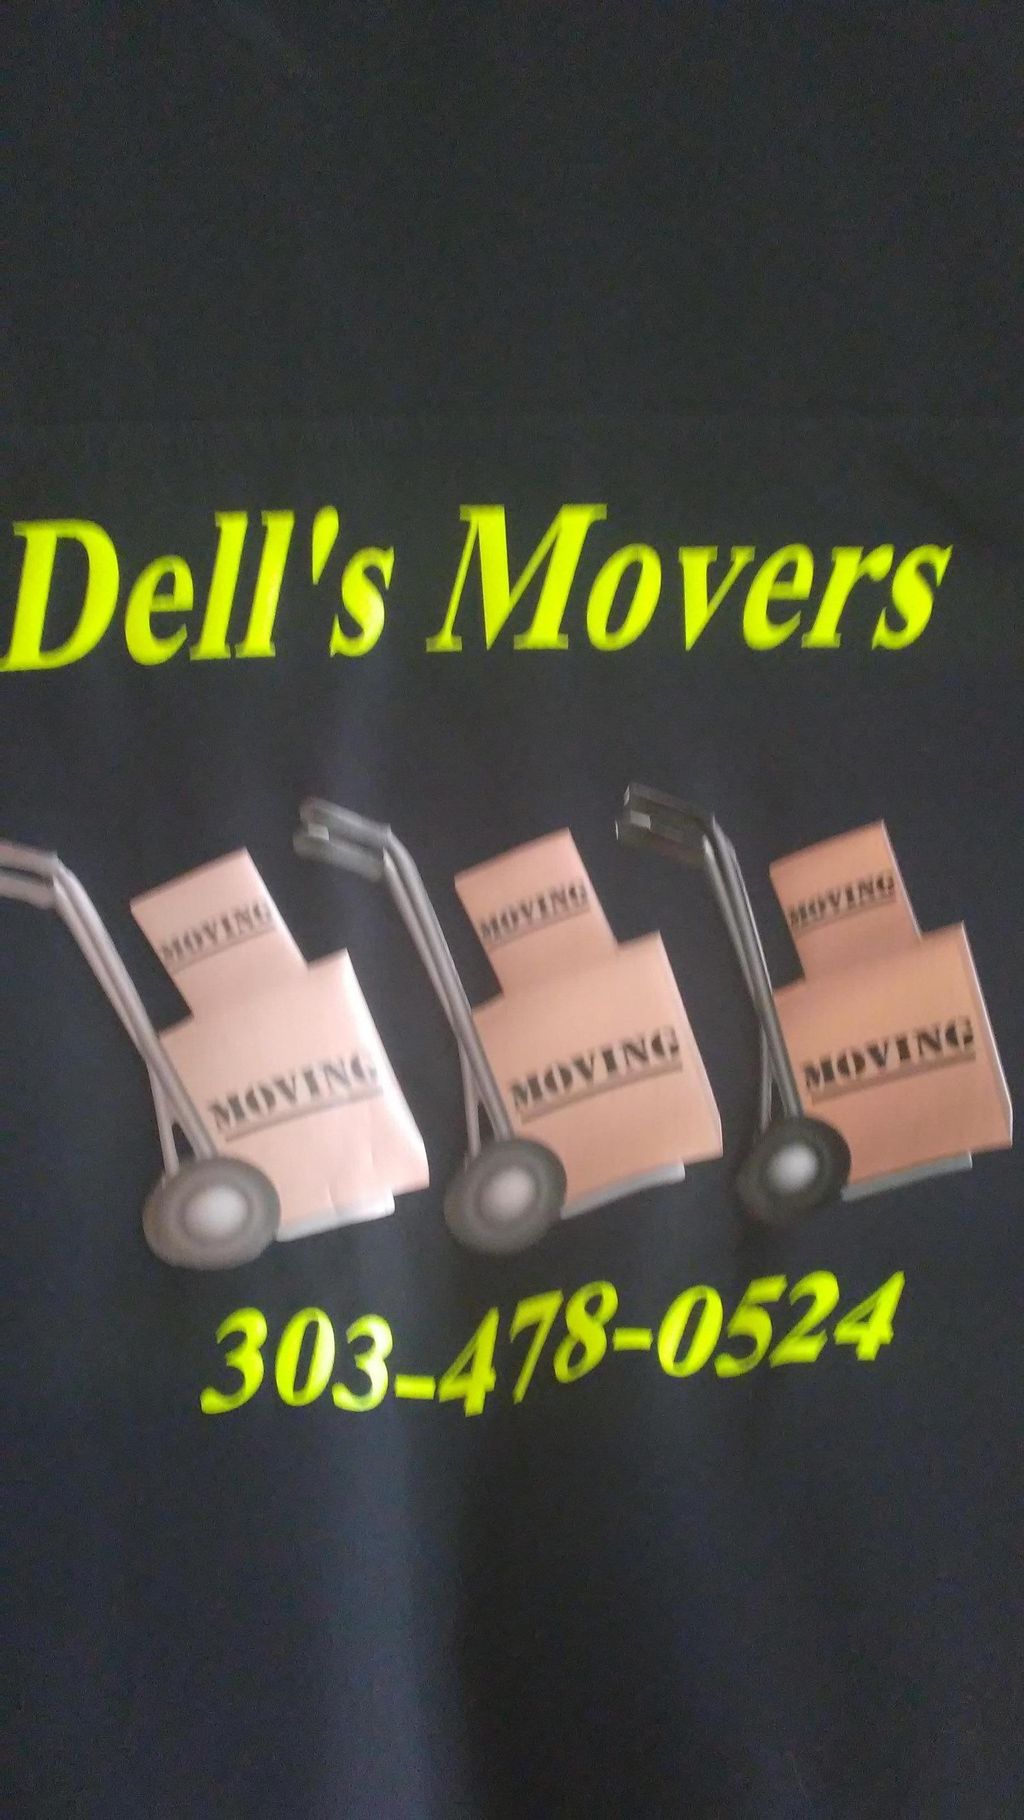 Dell's Movers